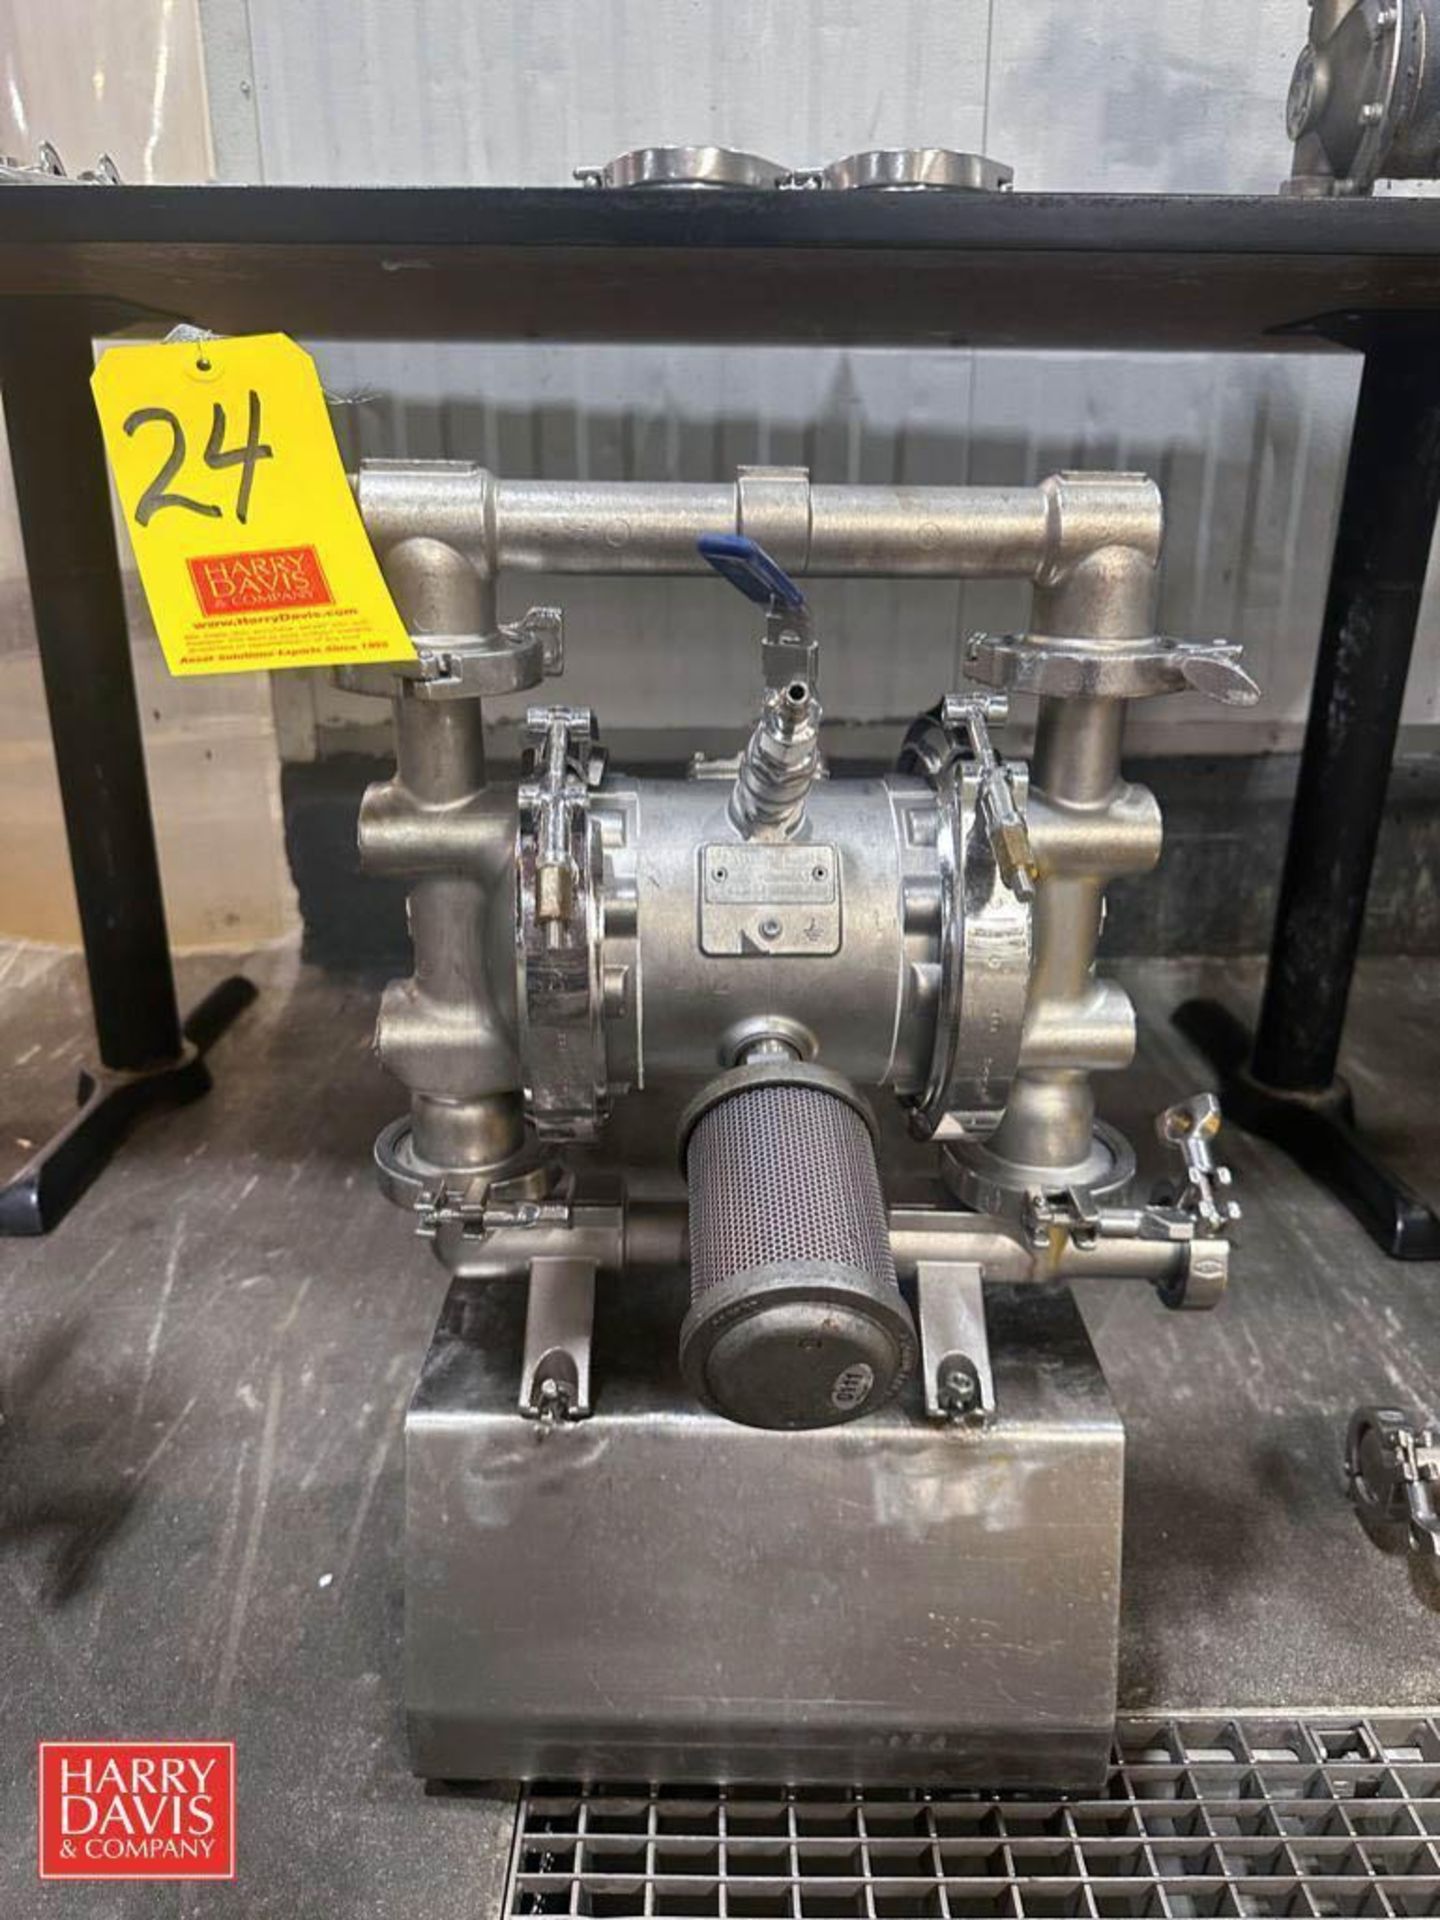 S/S Diaphragm Pump with Muffler: Mounted on S/S Base - Rigging Fee: $125